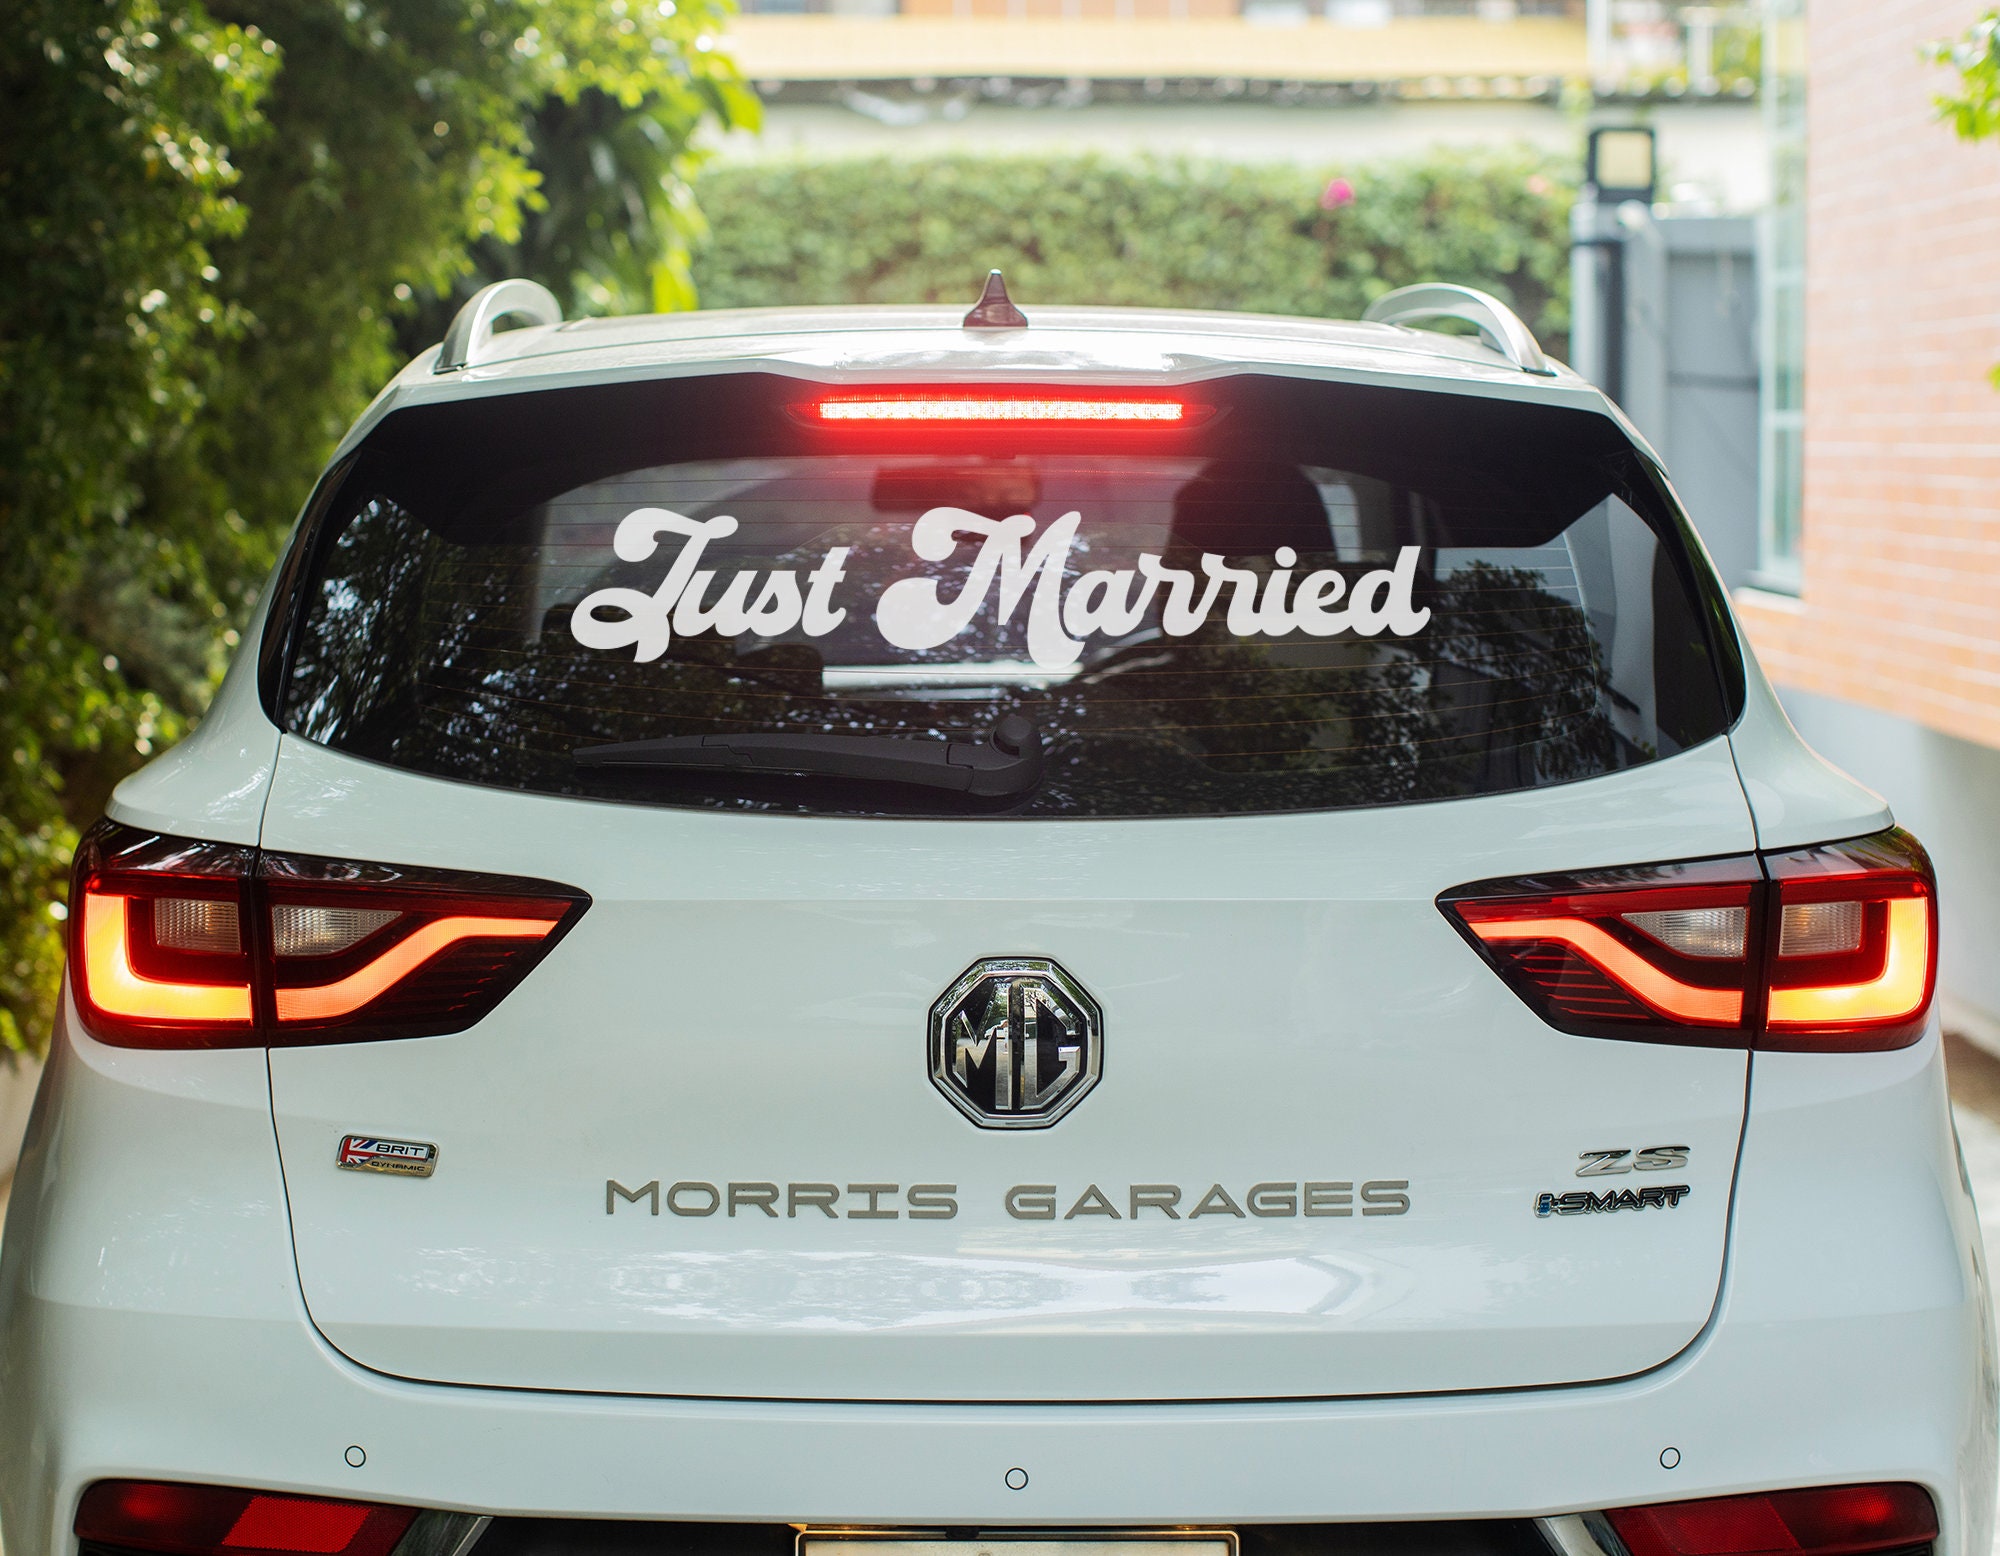 Just Married Car Decorations 